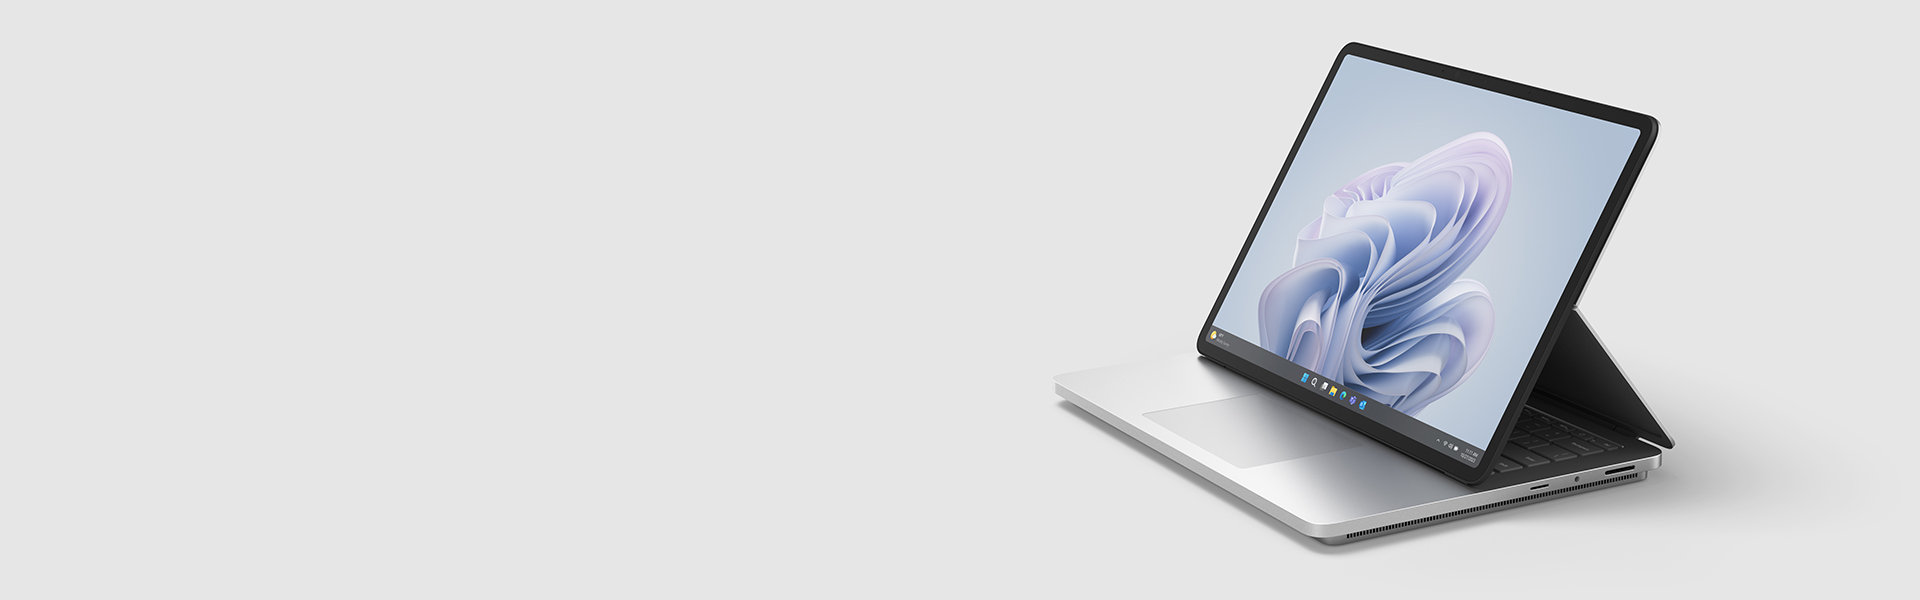 Discover Microsoft Surface Pro 2-in-1 laptop computers – Microsoft